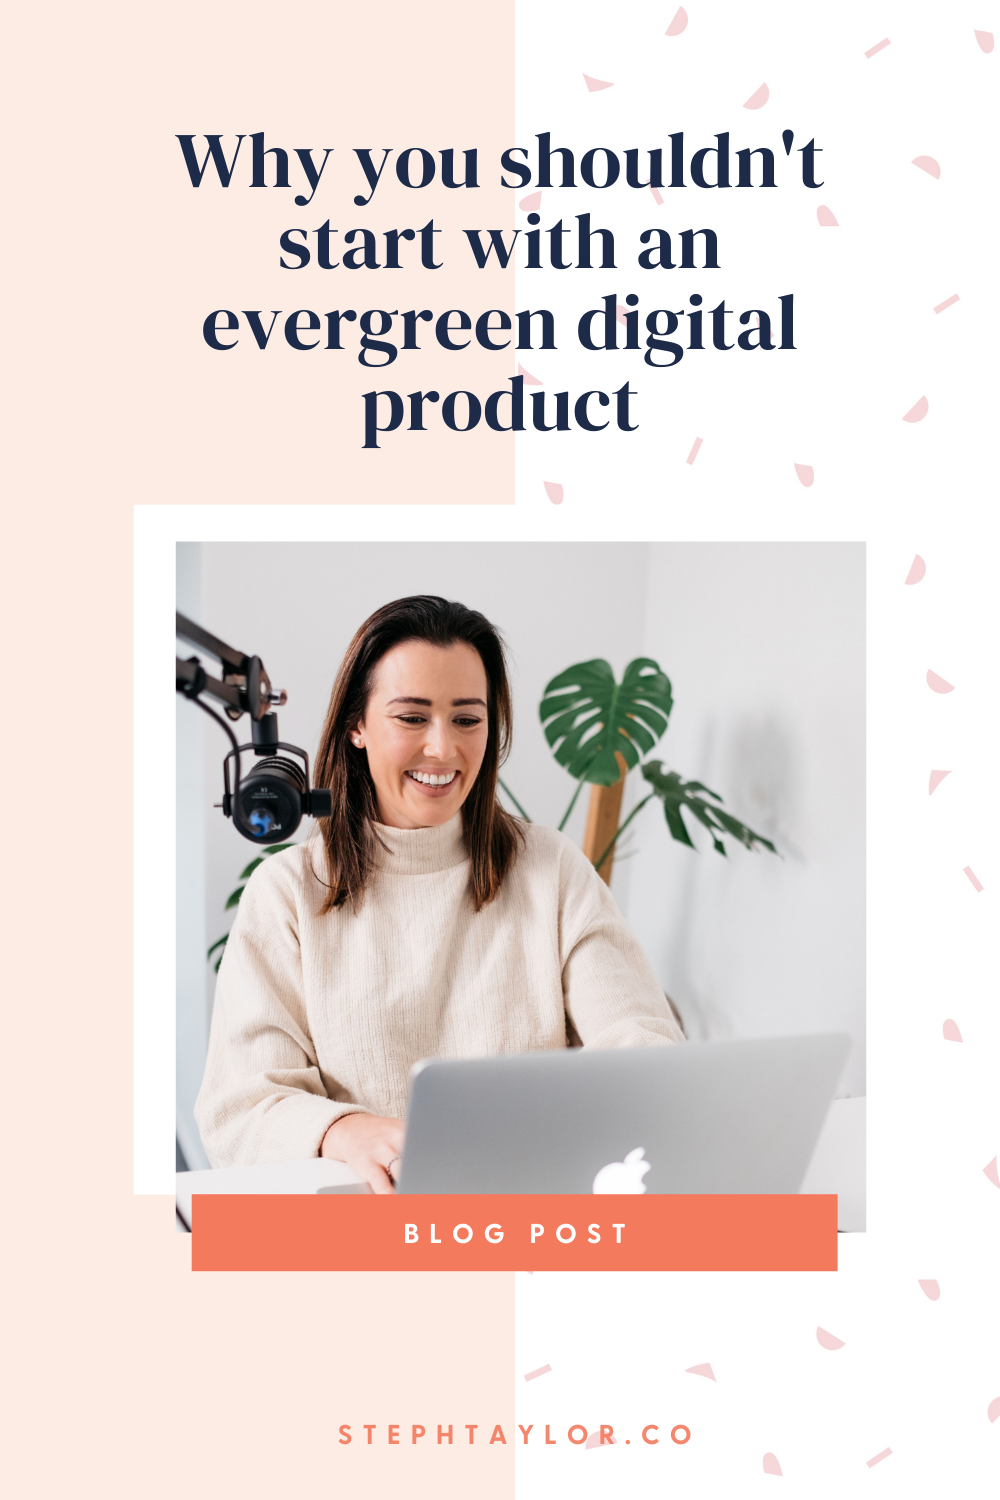 Why you shouldn't start with an evergreen digital product